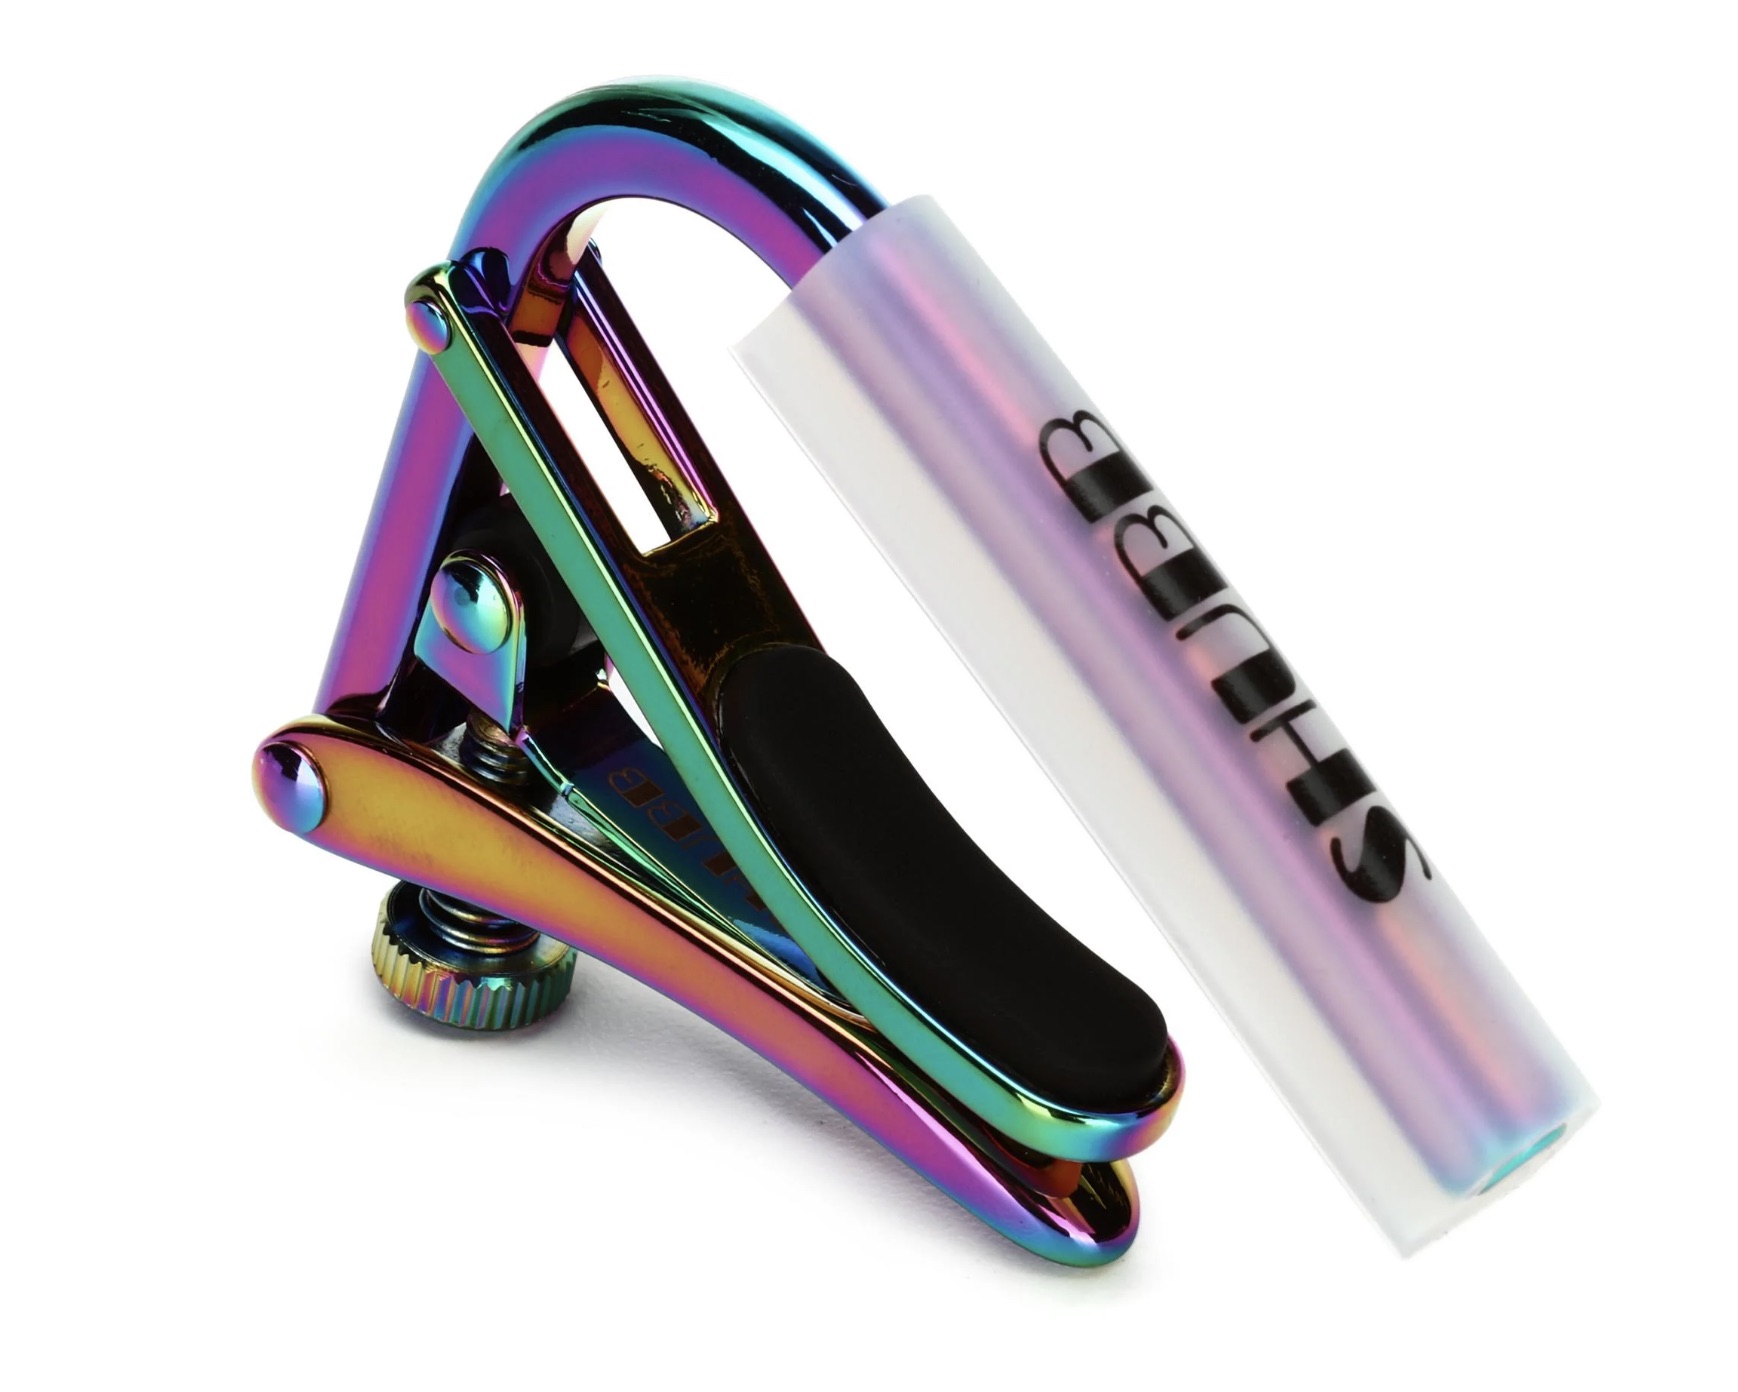 Paua Pearl Capo by Schubb Product